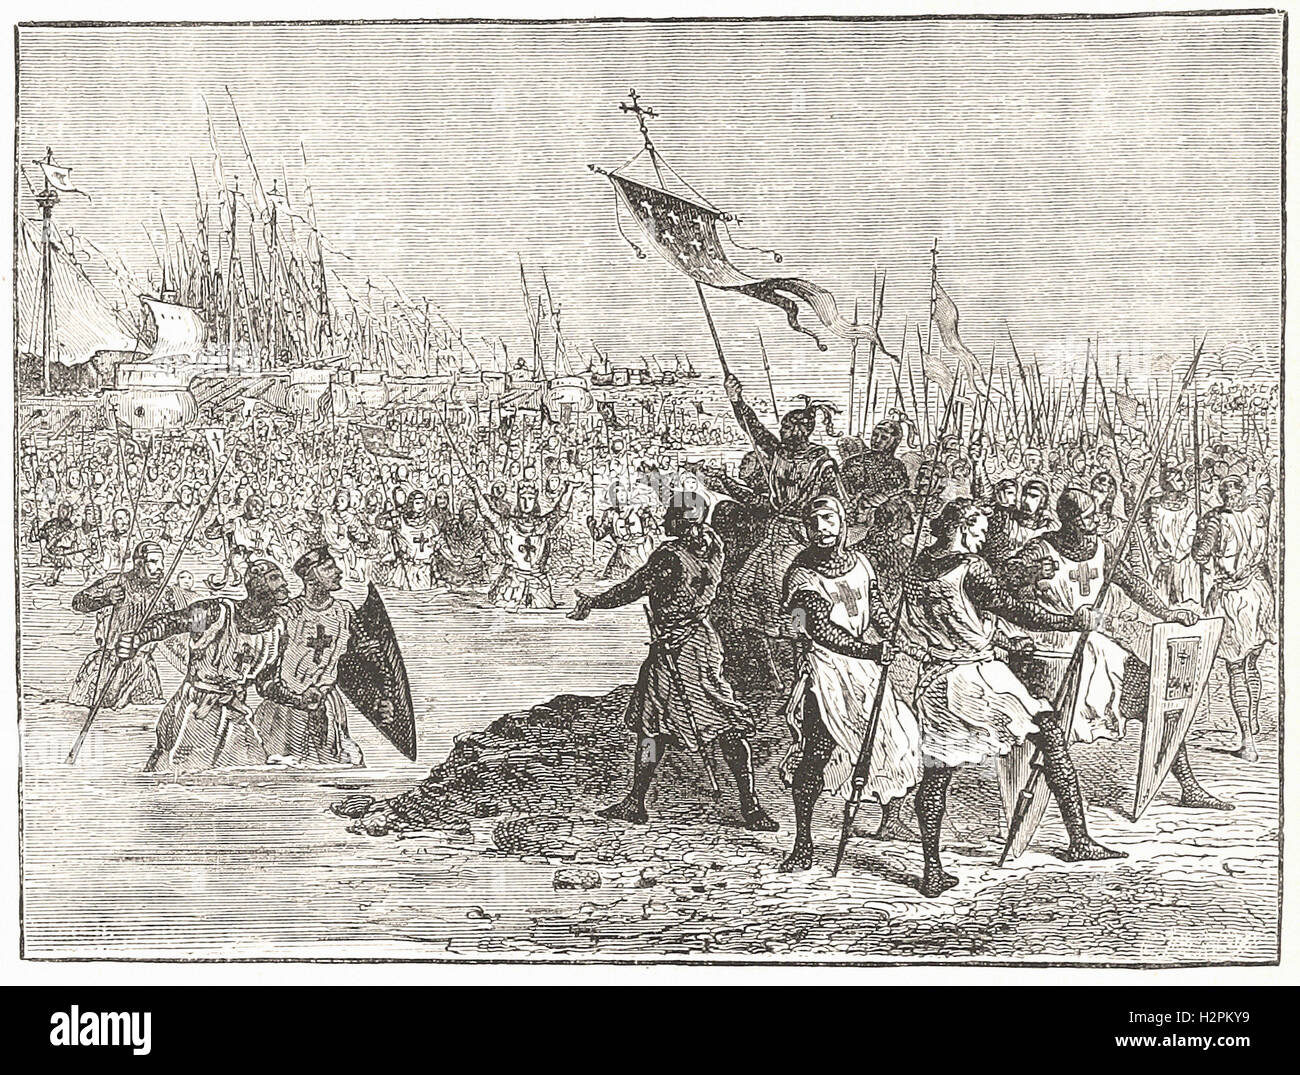 LOUIS IX. LANDING IN EGYPT. - from 'Cassell's Illustrated Universal History' - 1882 Stock Photo